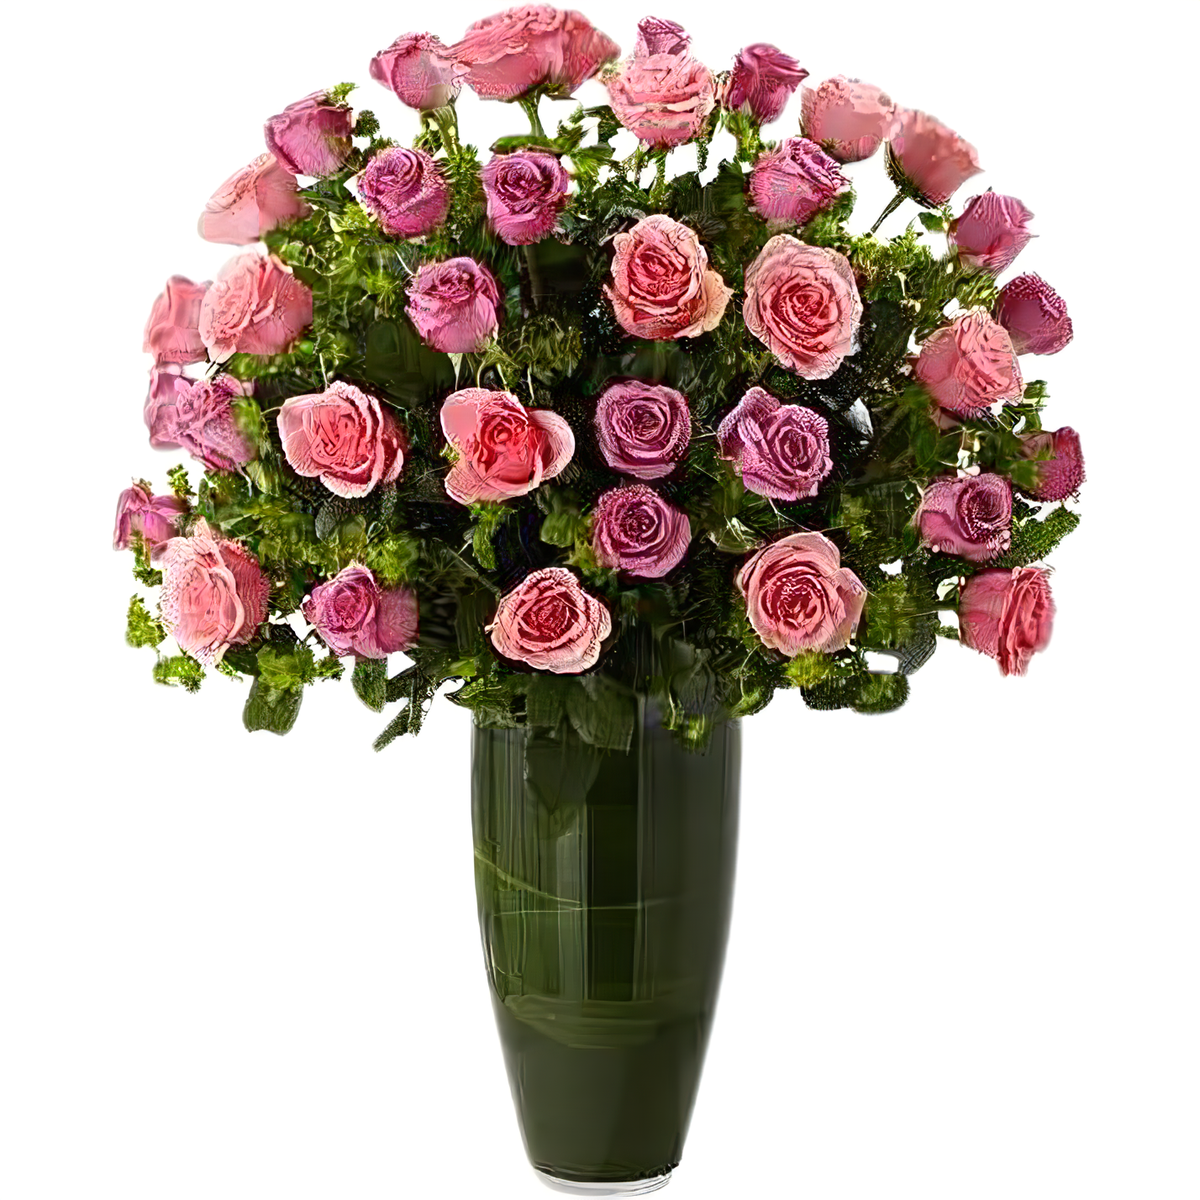 Luxury Rose Bouquet - 24 Premium Pink &amp; Lavender Long Stem Roses - Products &gt; Luxury Collection